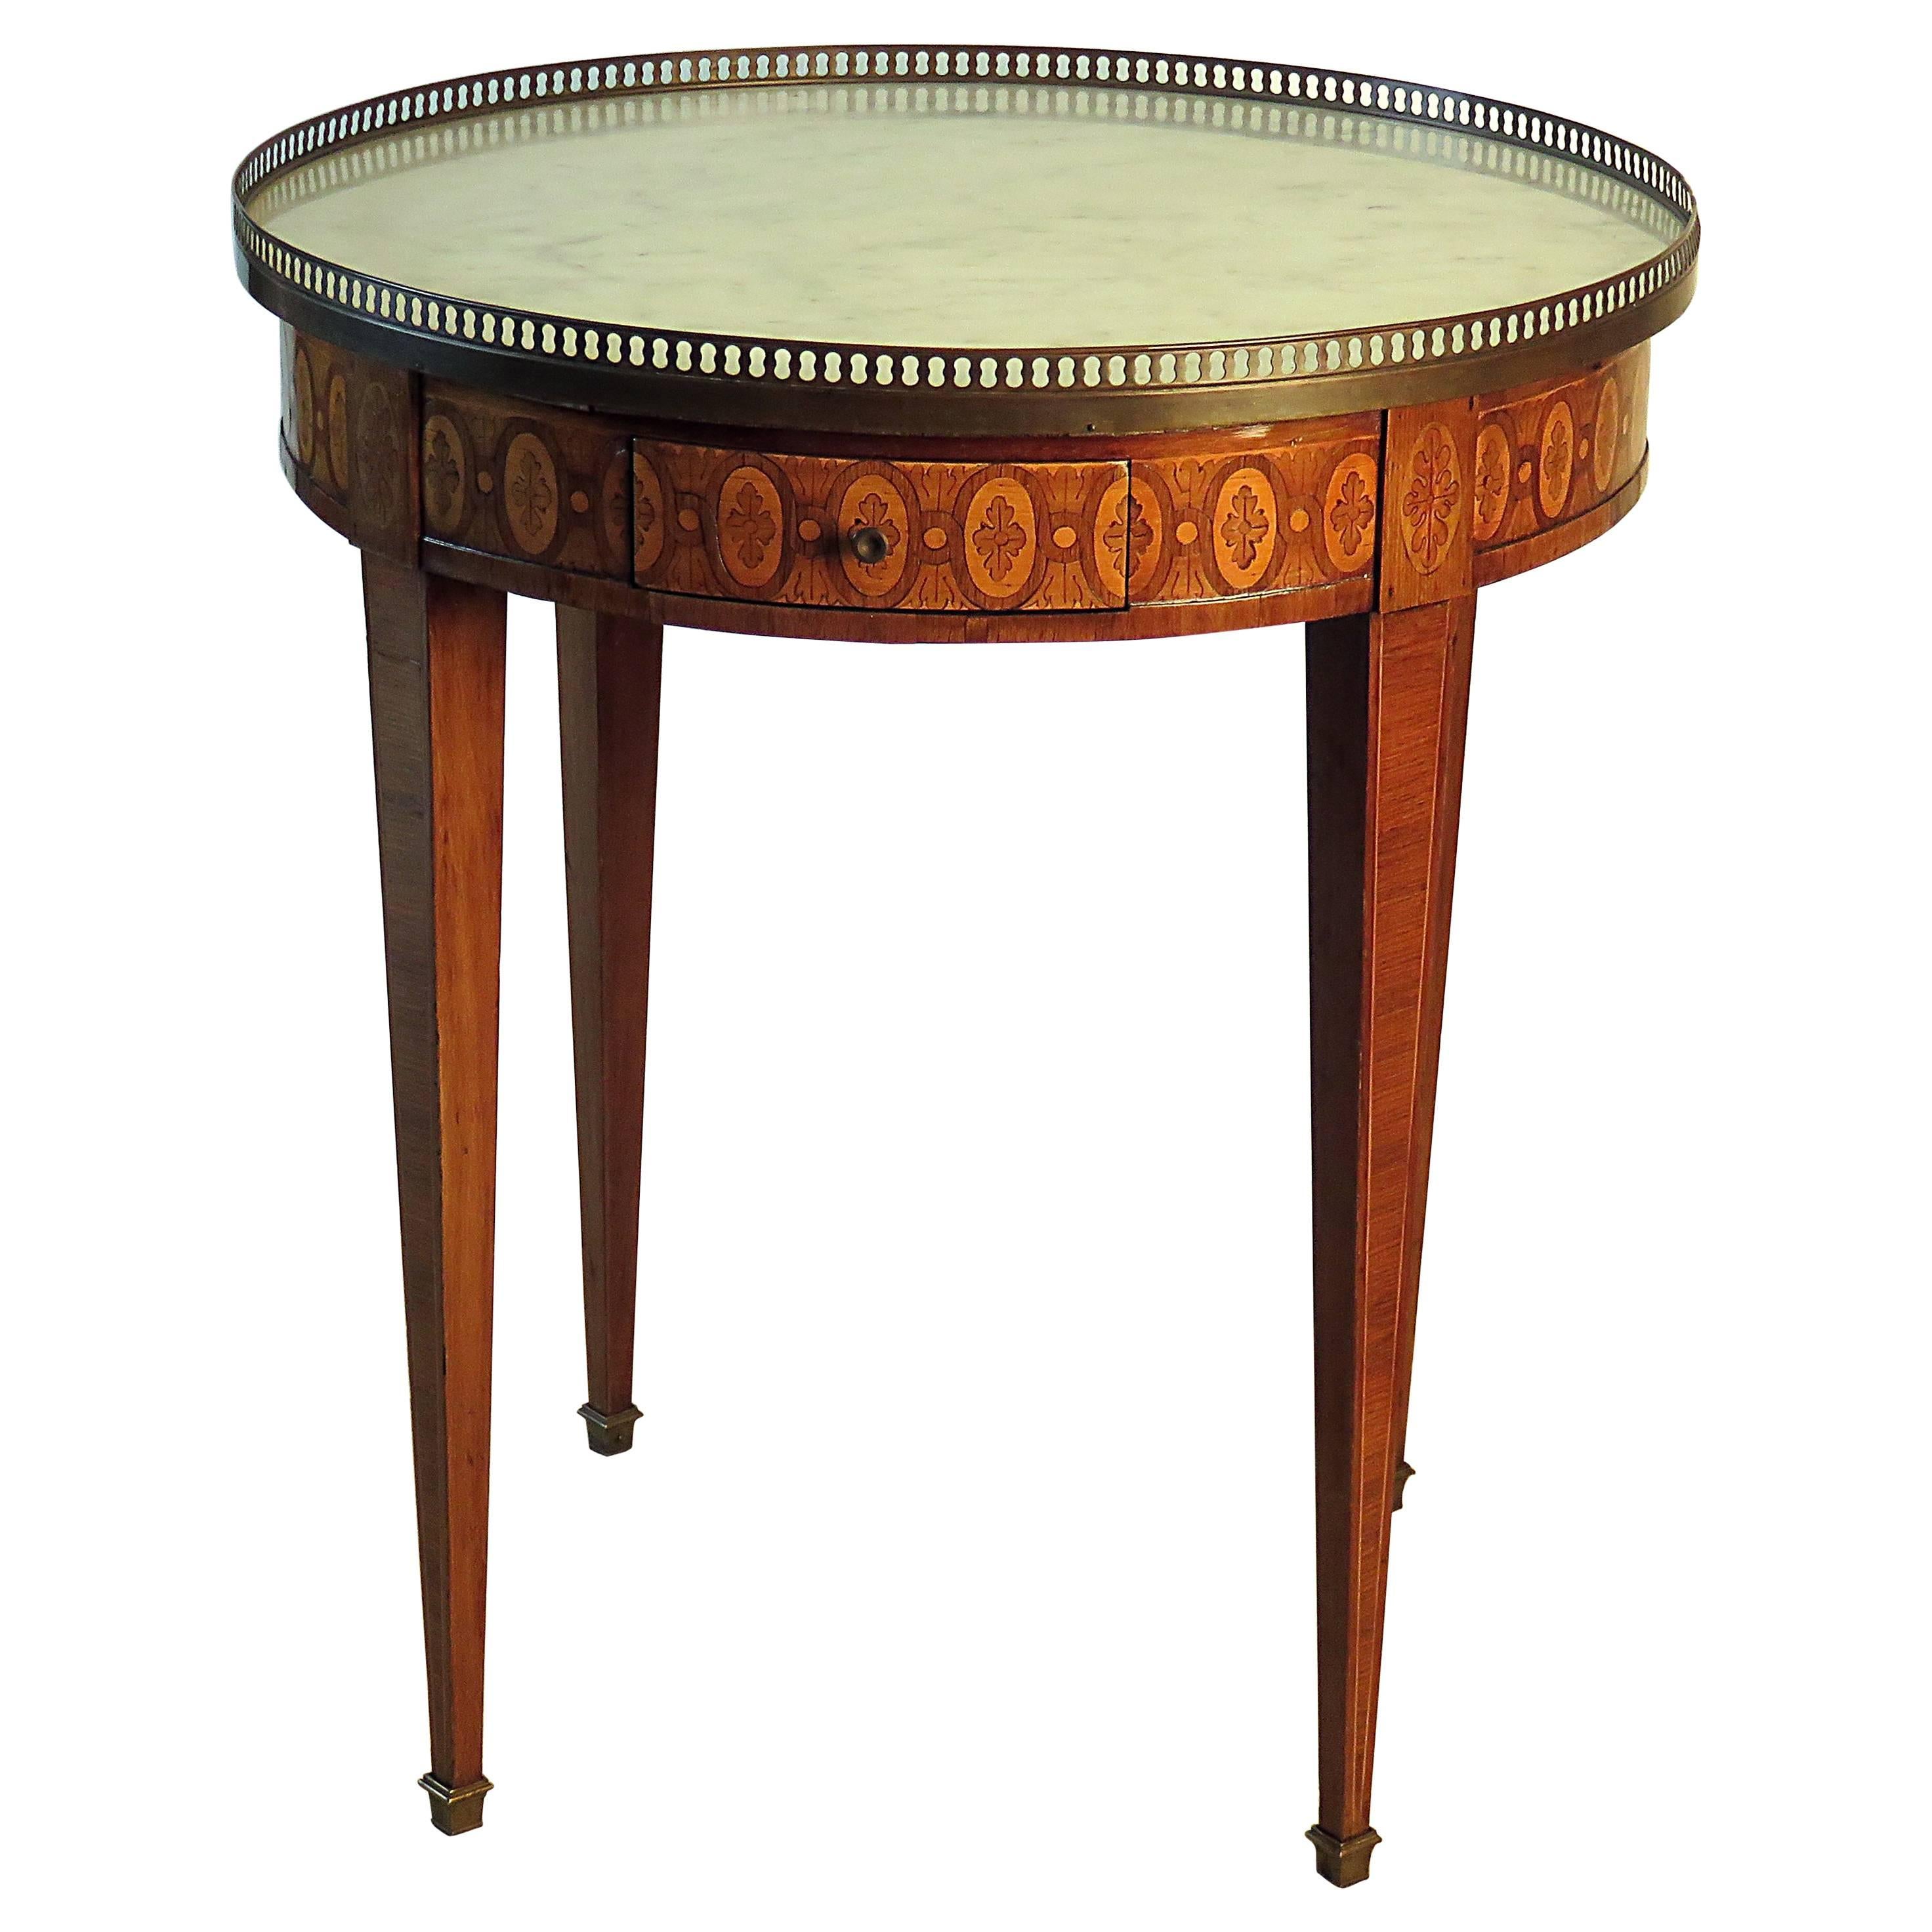 French Louis XVI Style Bouilotte or Gueridon with Marble, Inlay and Brass